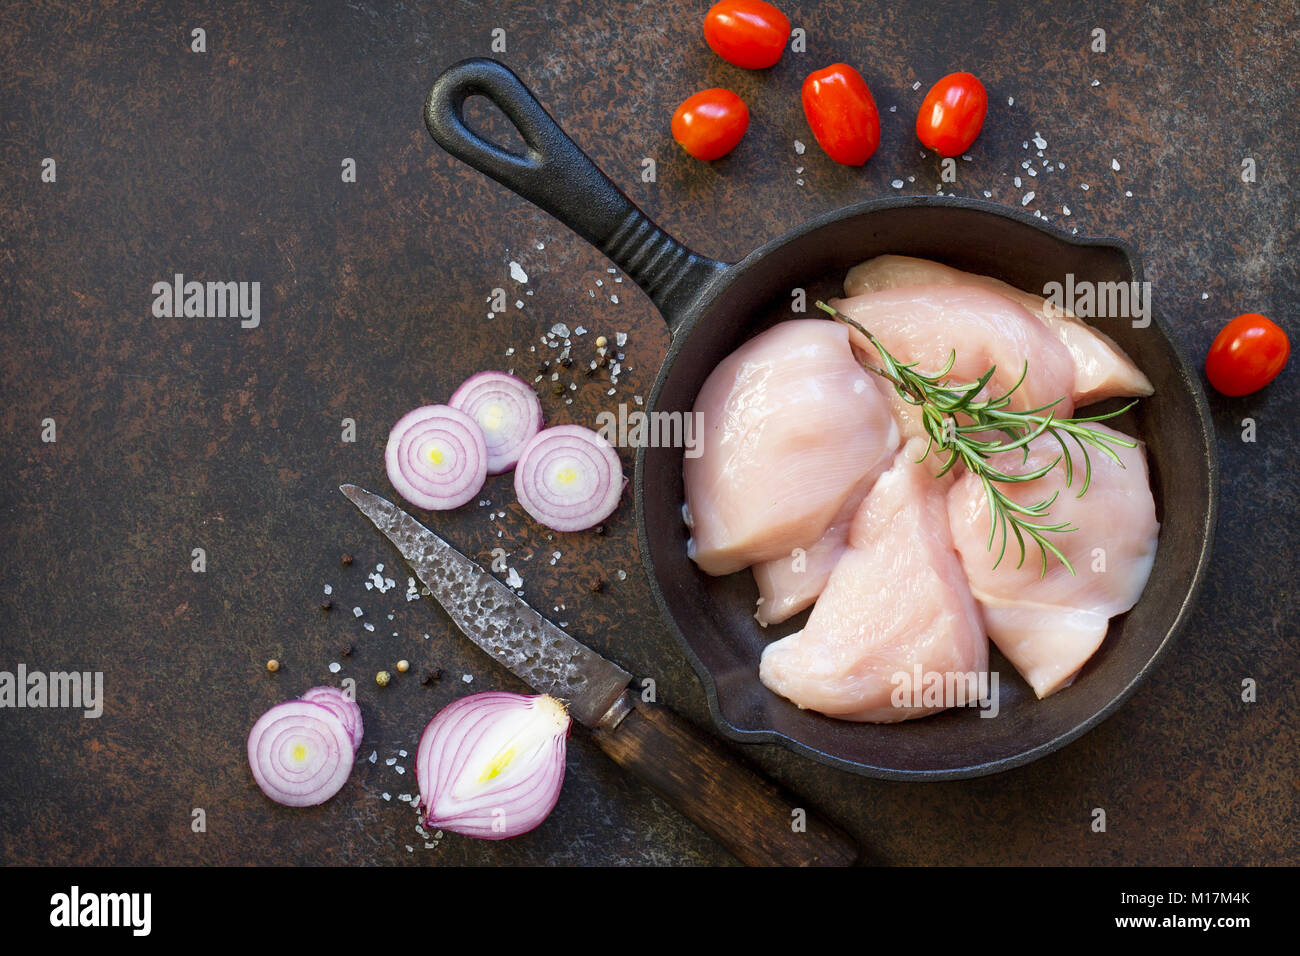 Fresh meat. Raw chicken fillet on a cast-iron frying pan, spices and fresh rosemary on the kitchen table. Top view with a copy. Stock Photo